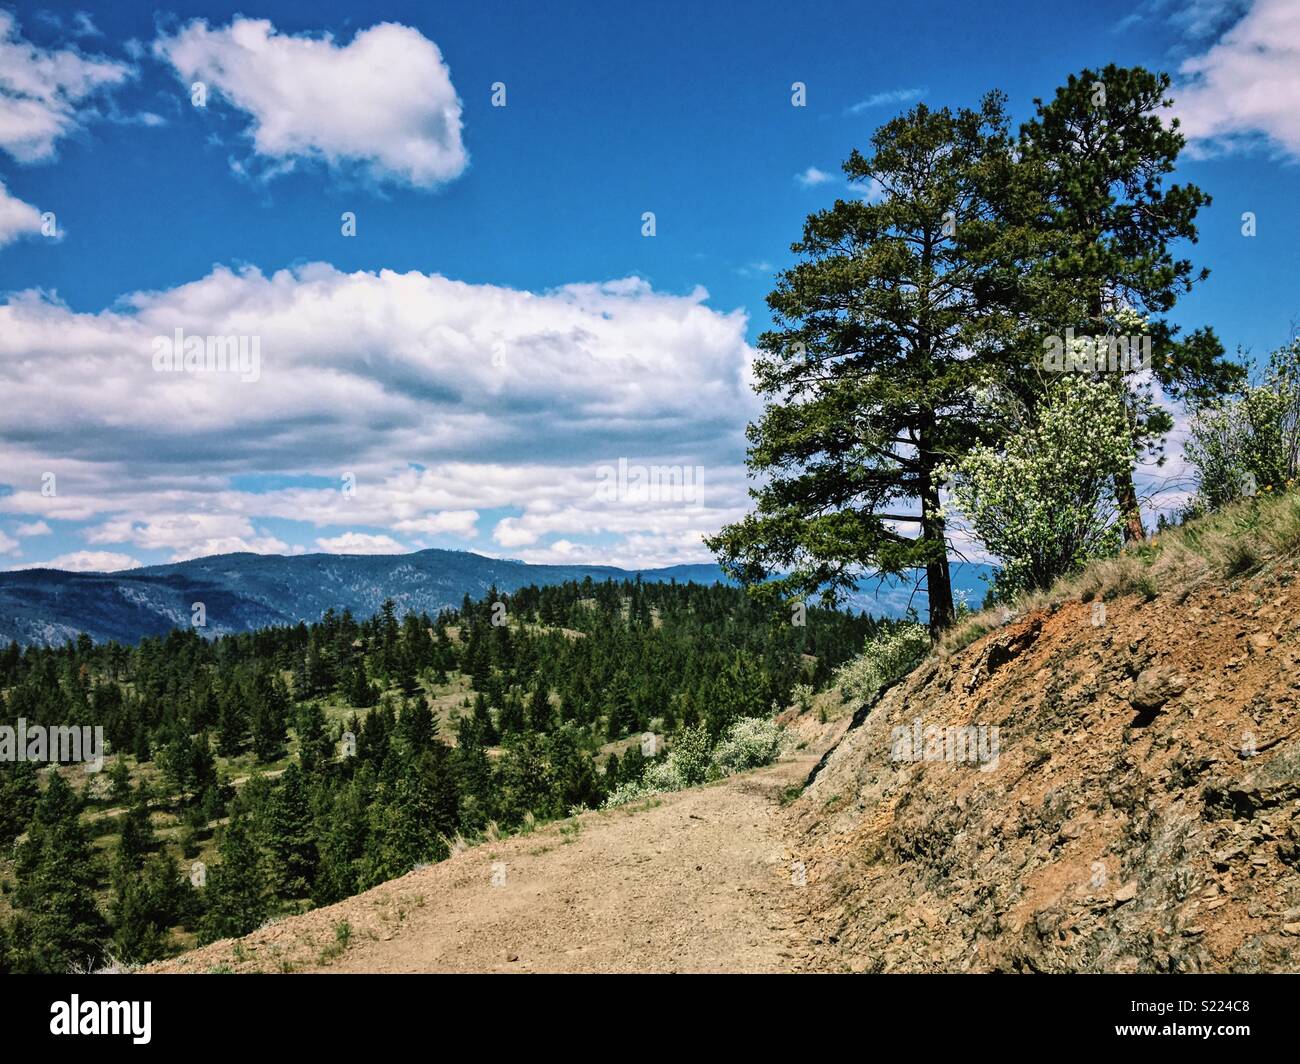 Bright sunny spring day in the Okanagan Valley under a blue sky. A hiking trail leads away with tree covered mountains in the distance. Stock Photo